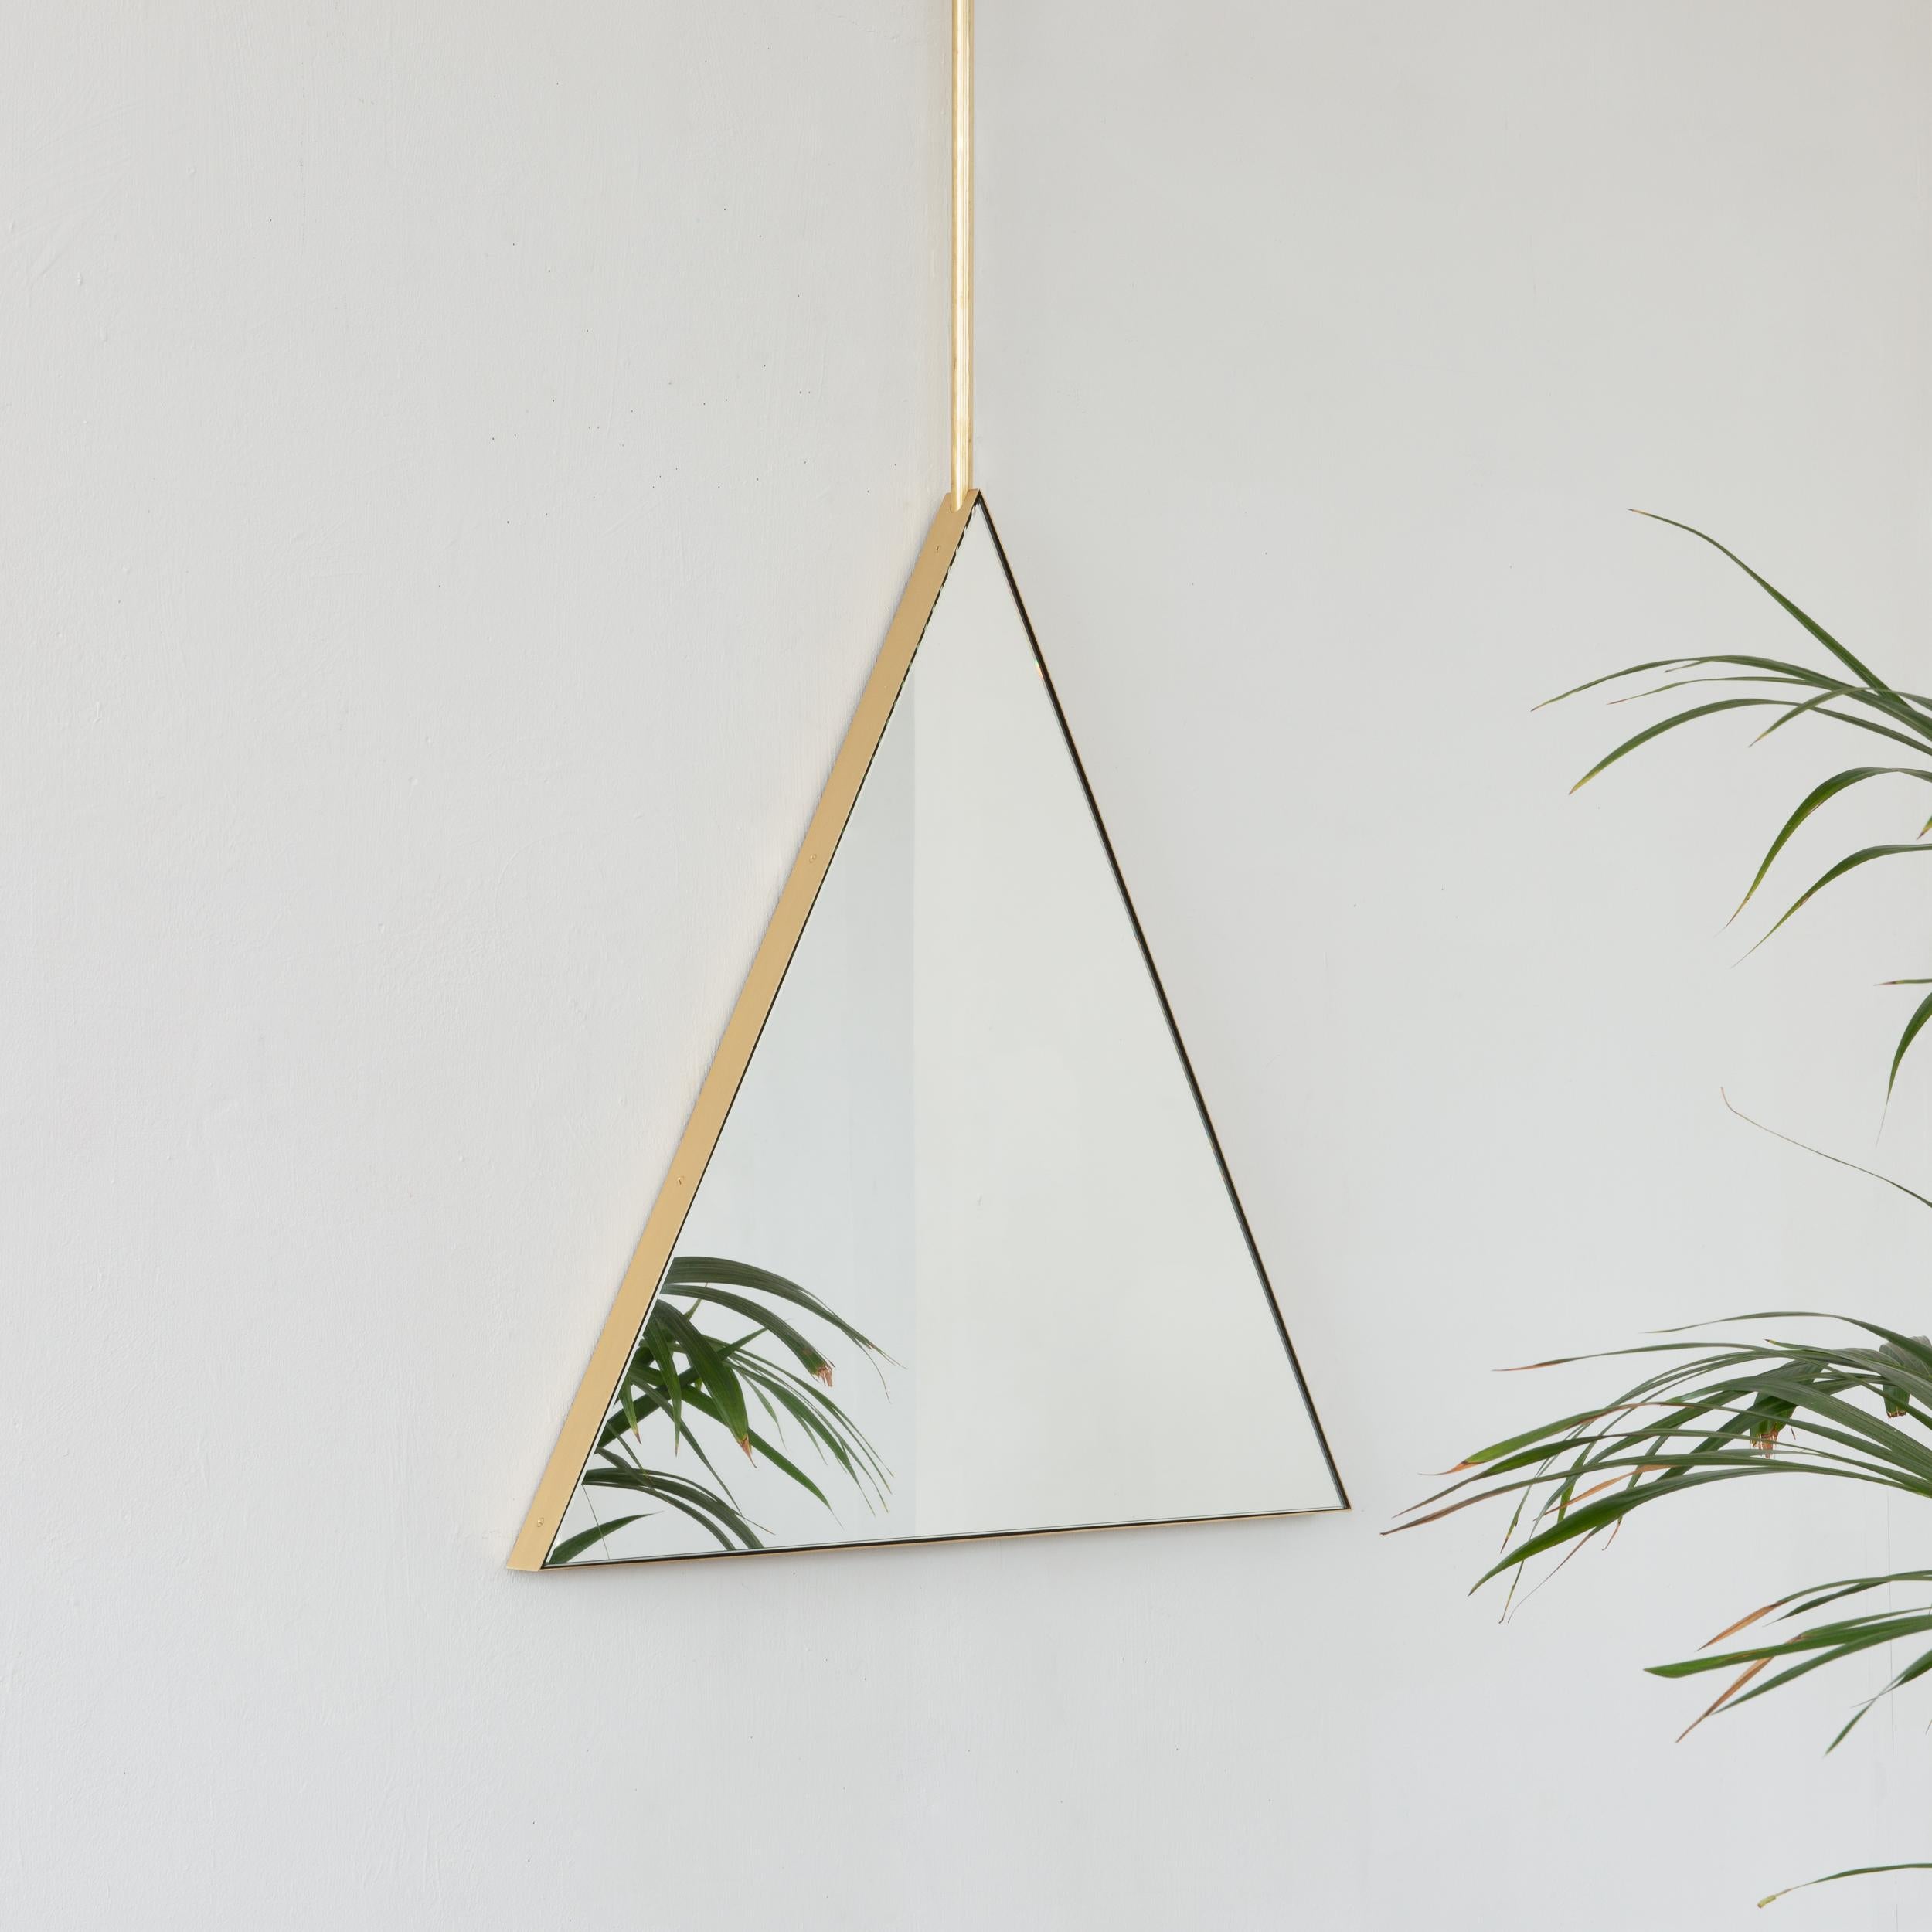 Original and unique ceiling suspended triangular mirror with an elegant solid brushed brass frame. Designed and handcrafted in London, UK, our unique and elegant collection of ceiling suspended mirrors is fully customisable to suit the specific